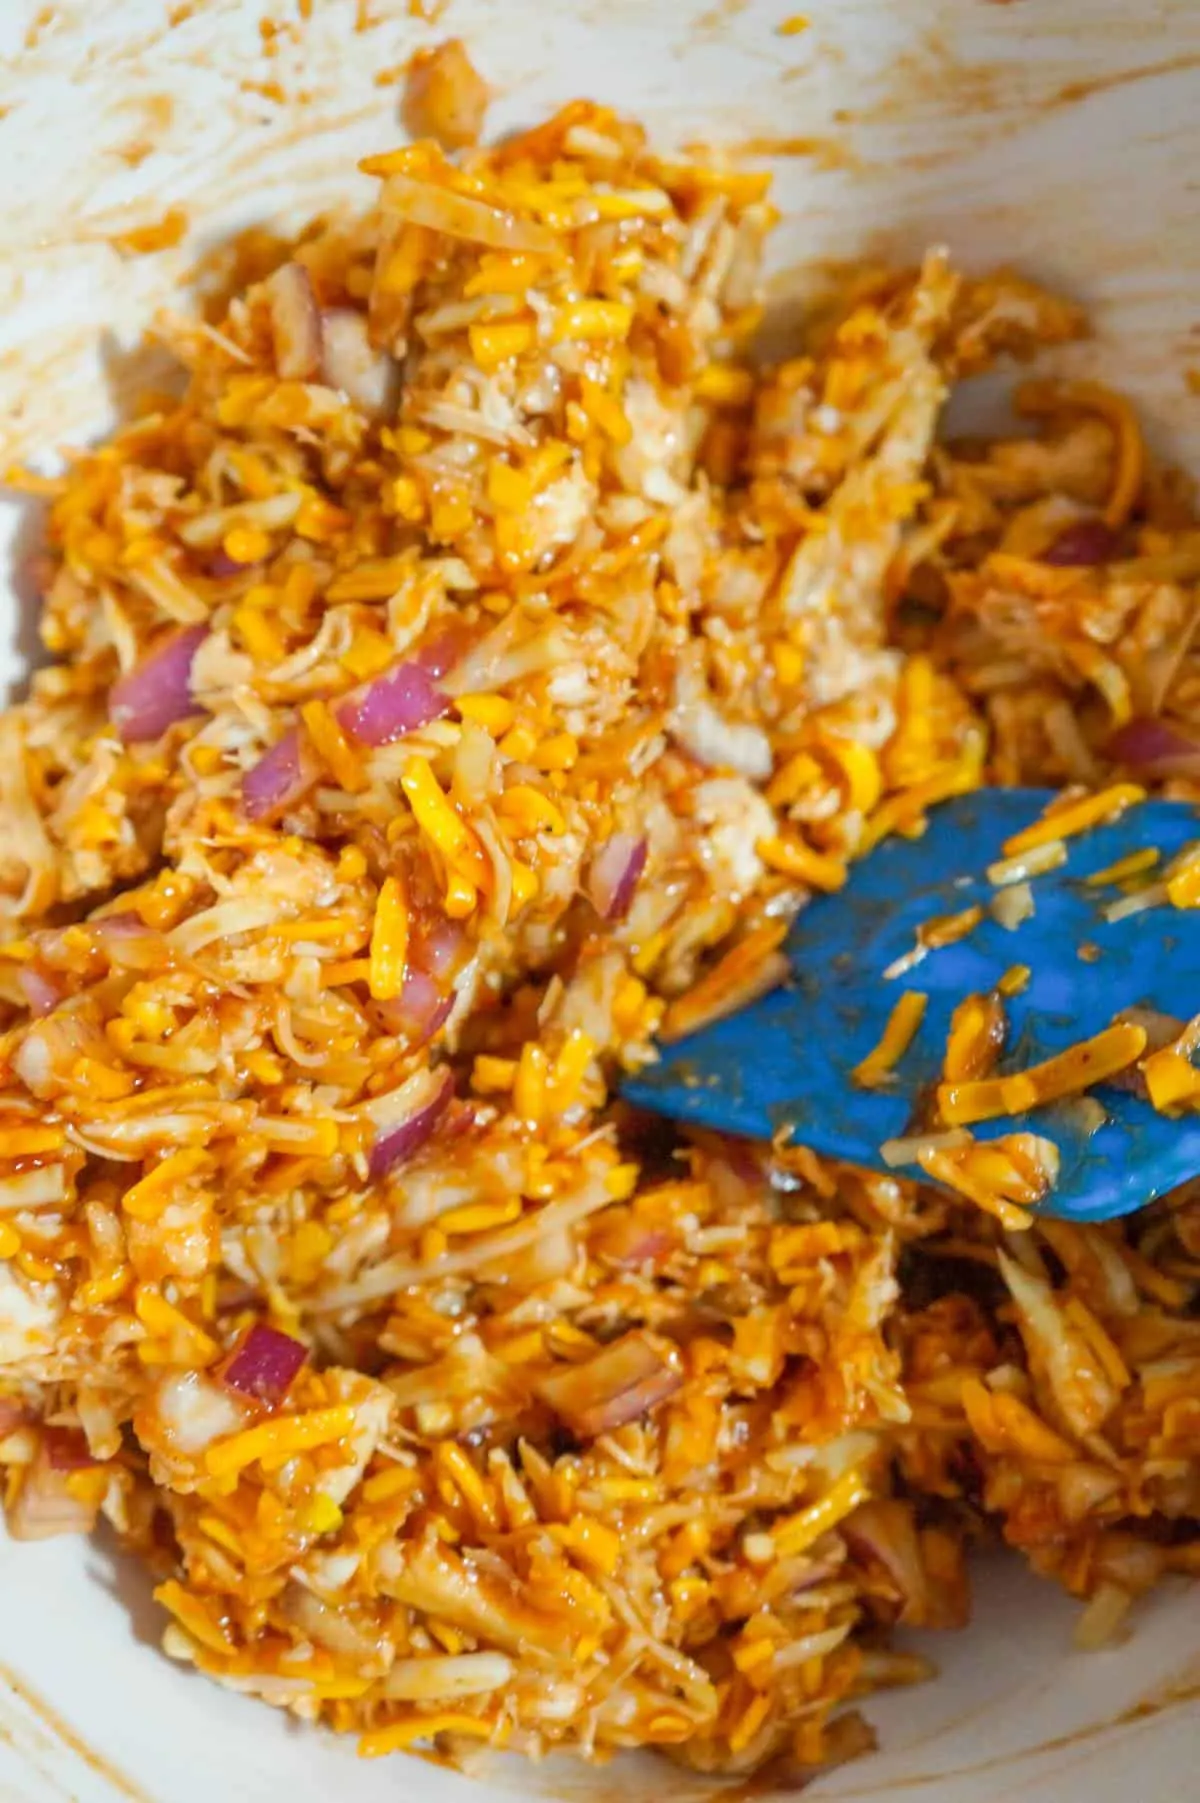 shredded bbq chicken mixture in a mixing bowl